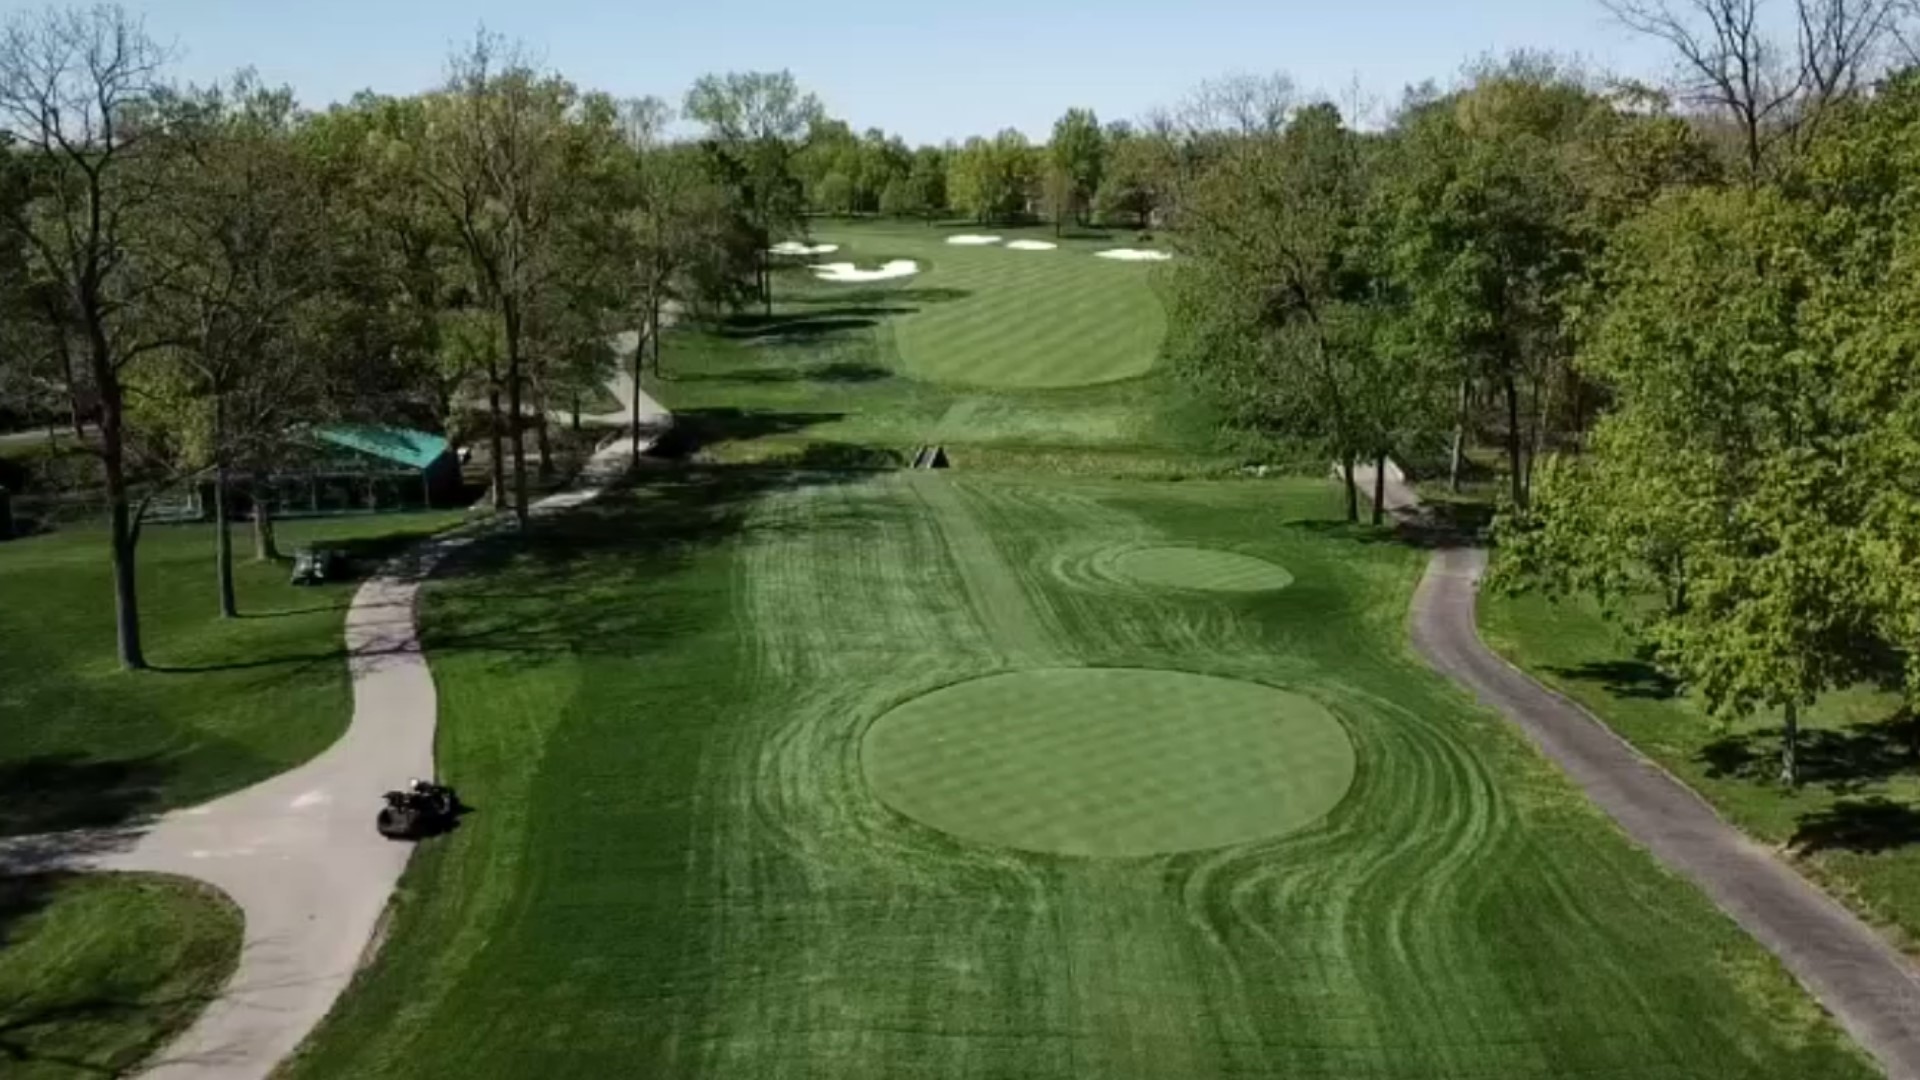 Drone 10 video gives aerial view of all 18 holes at Muirfield Village Golf Club, home of the Memorial Tournament.